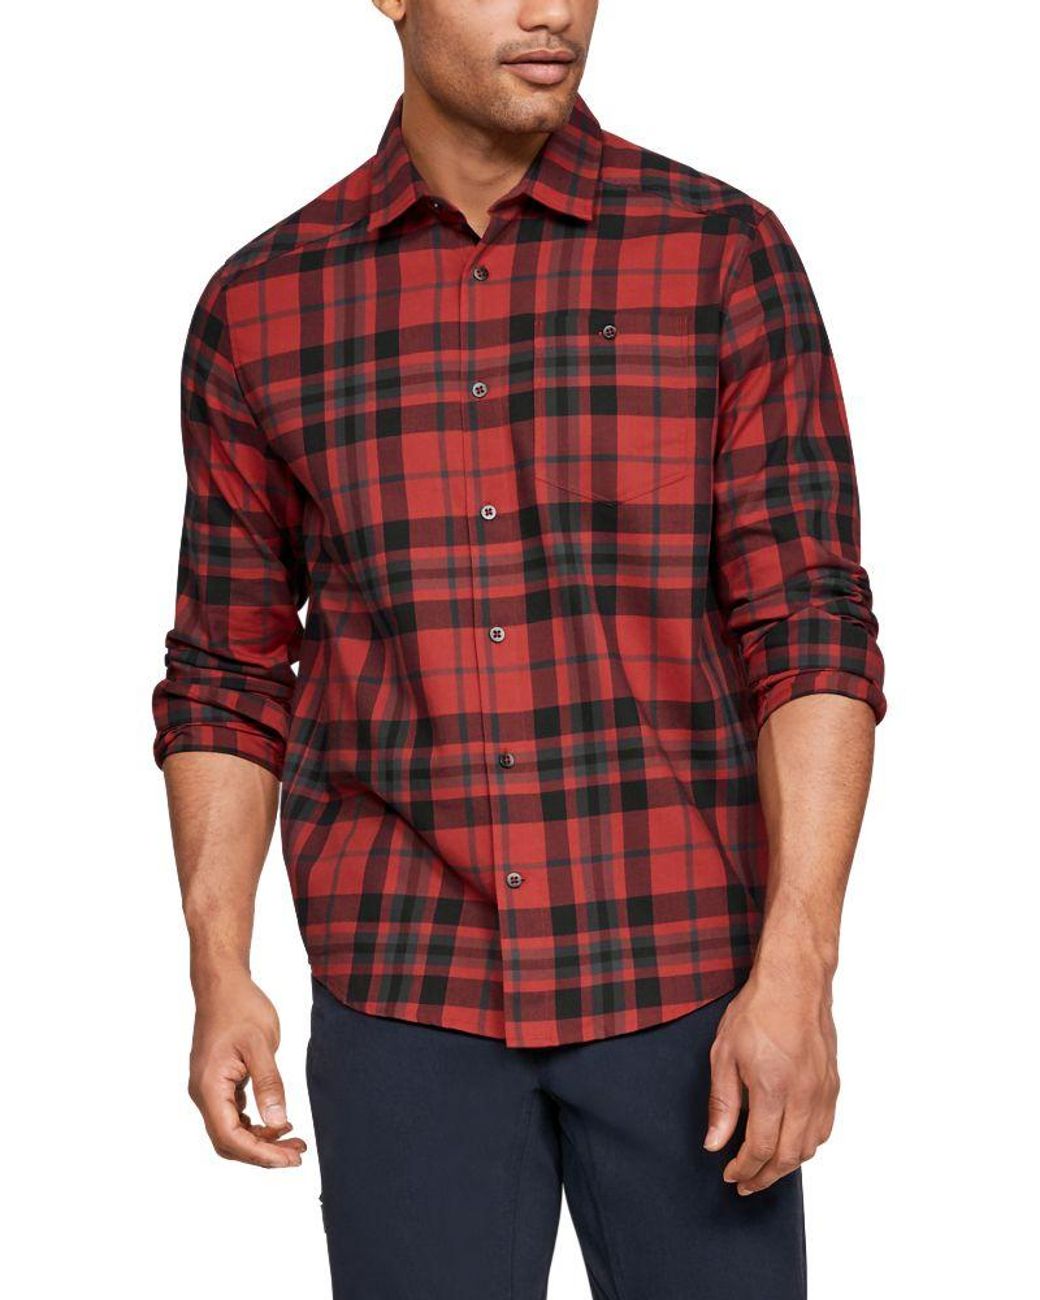 Under Armour Tradesman Flannel Long Sleeve Shirt in Red for Men - Lyst